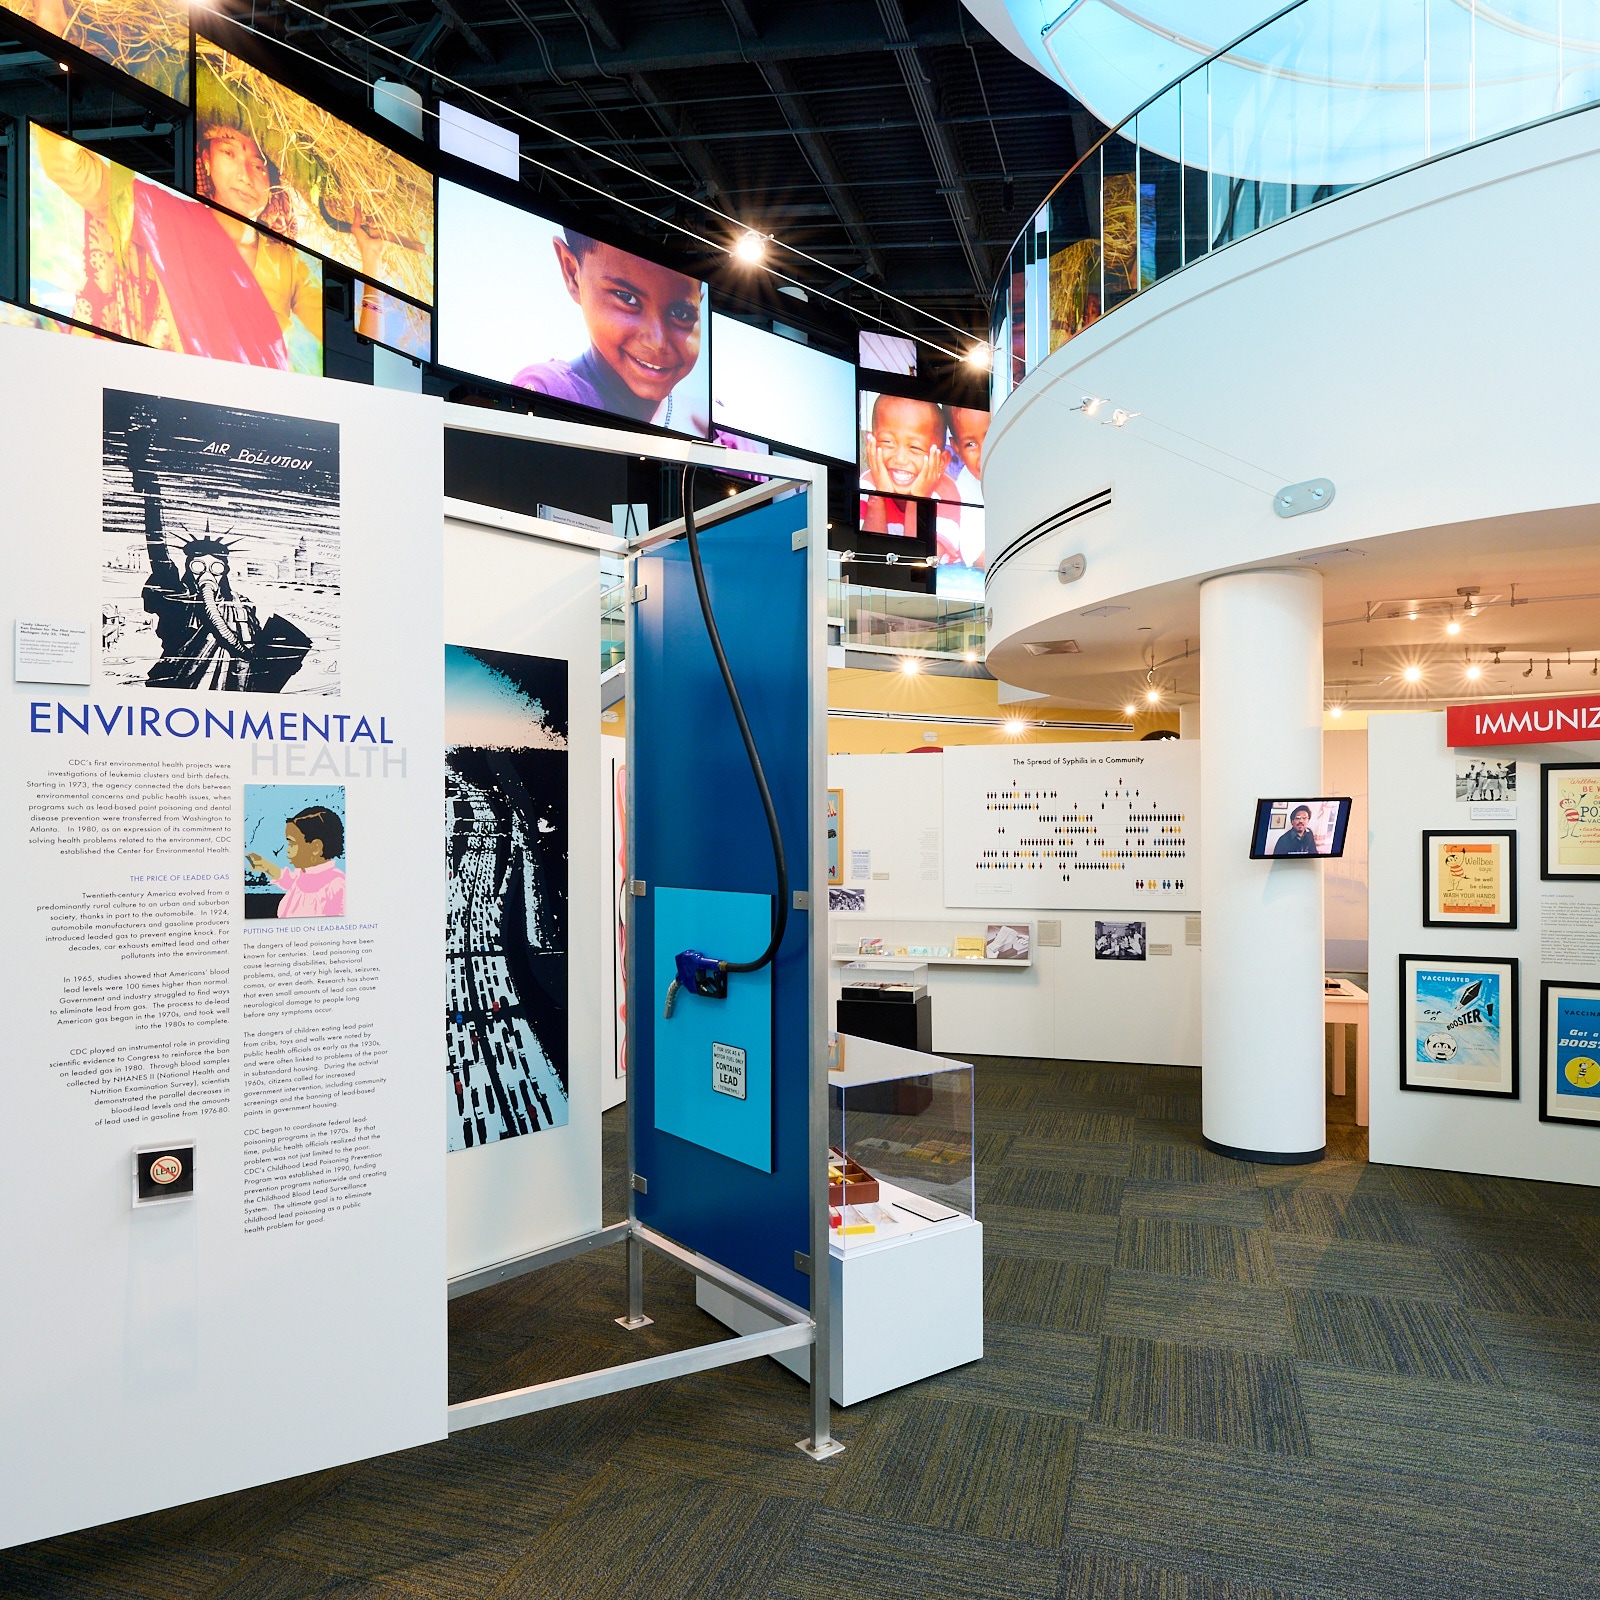 Current exhibits that are currently on display